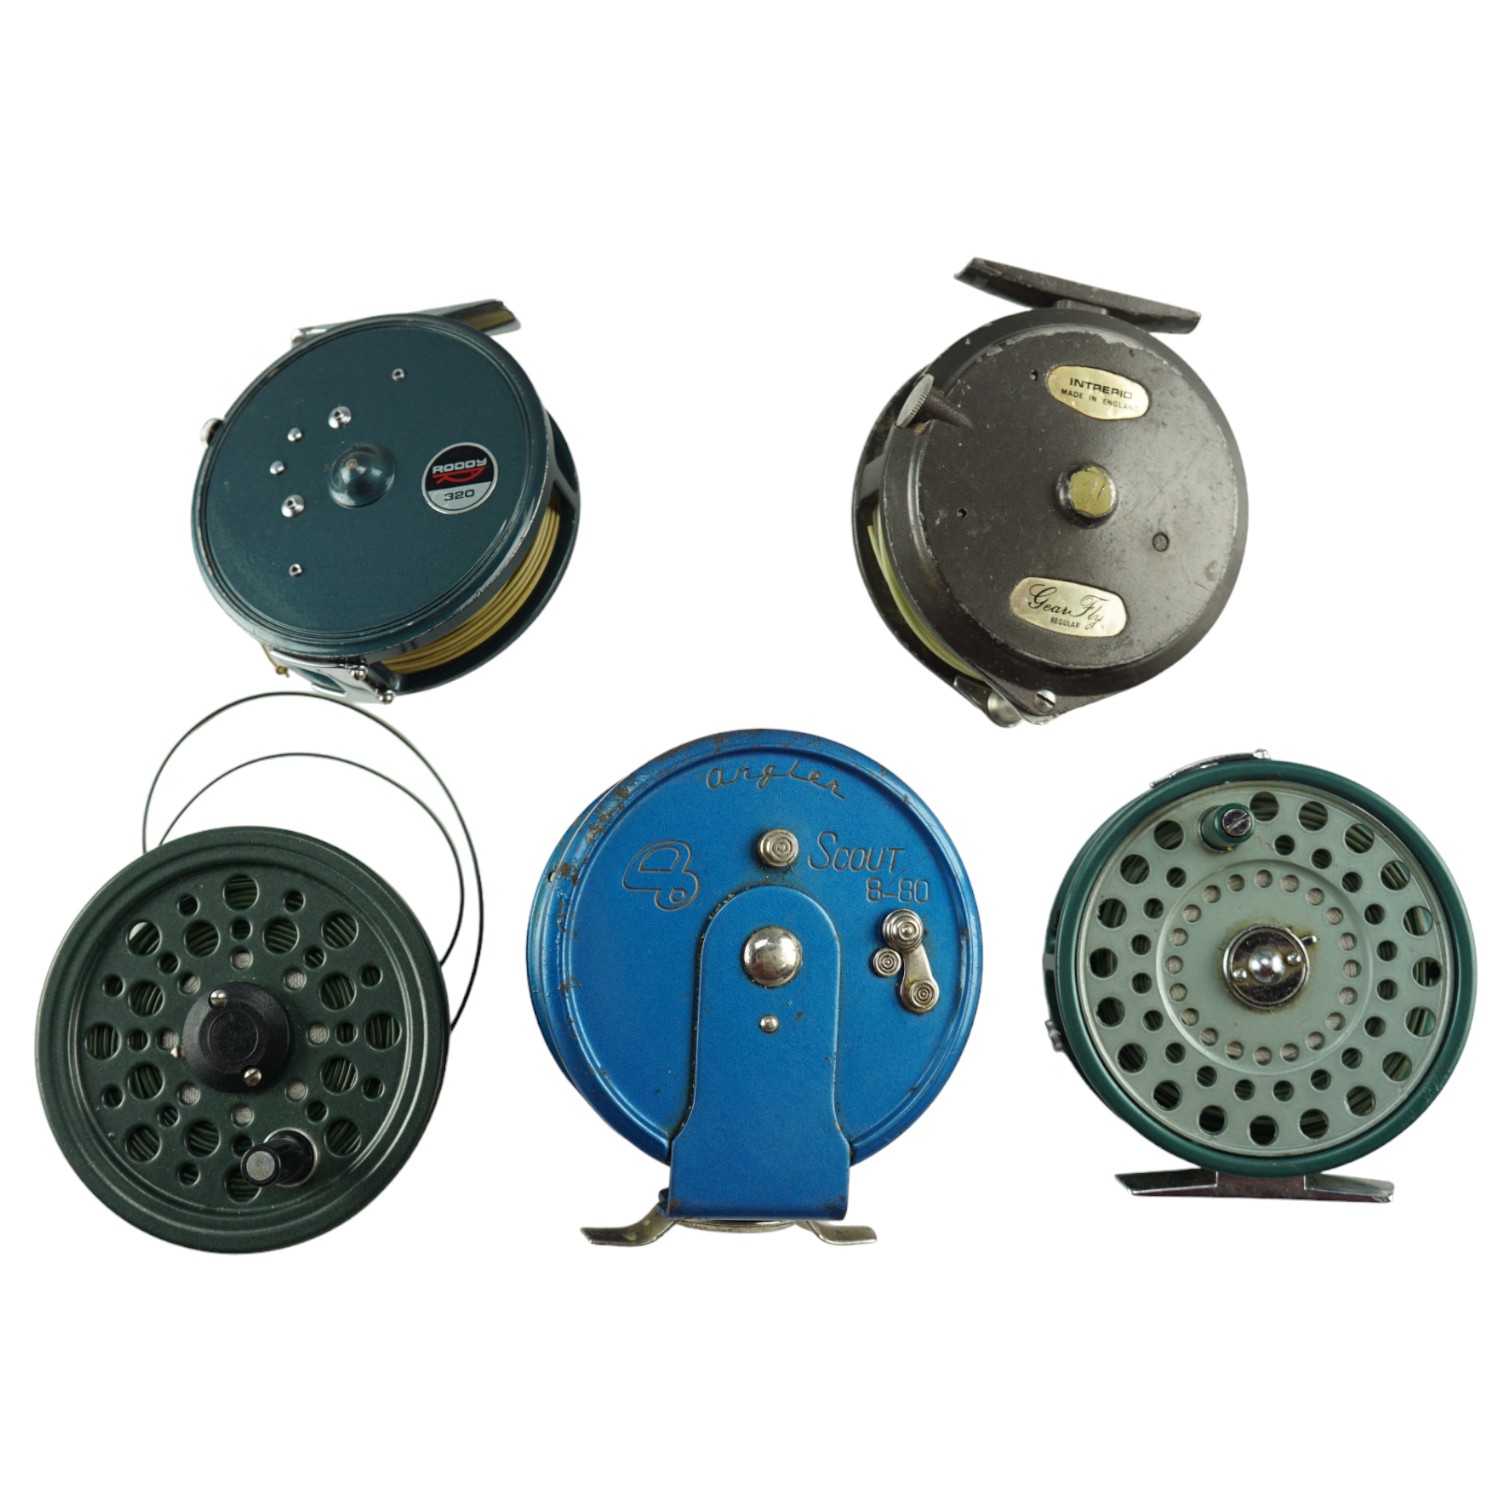 Two Roddy 320 centre-pin fly fishing reels together with an Intrepid Gear Fly, an Angler Scout 8 -